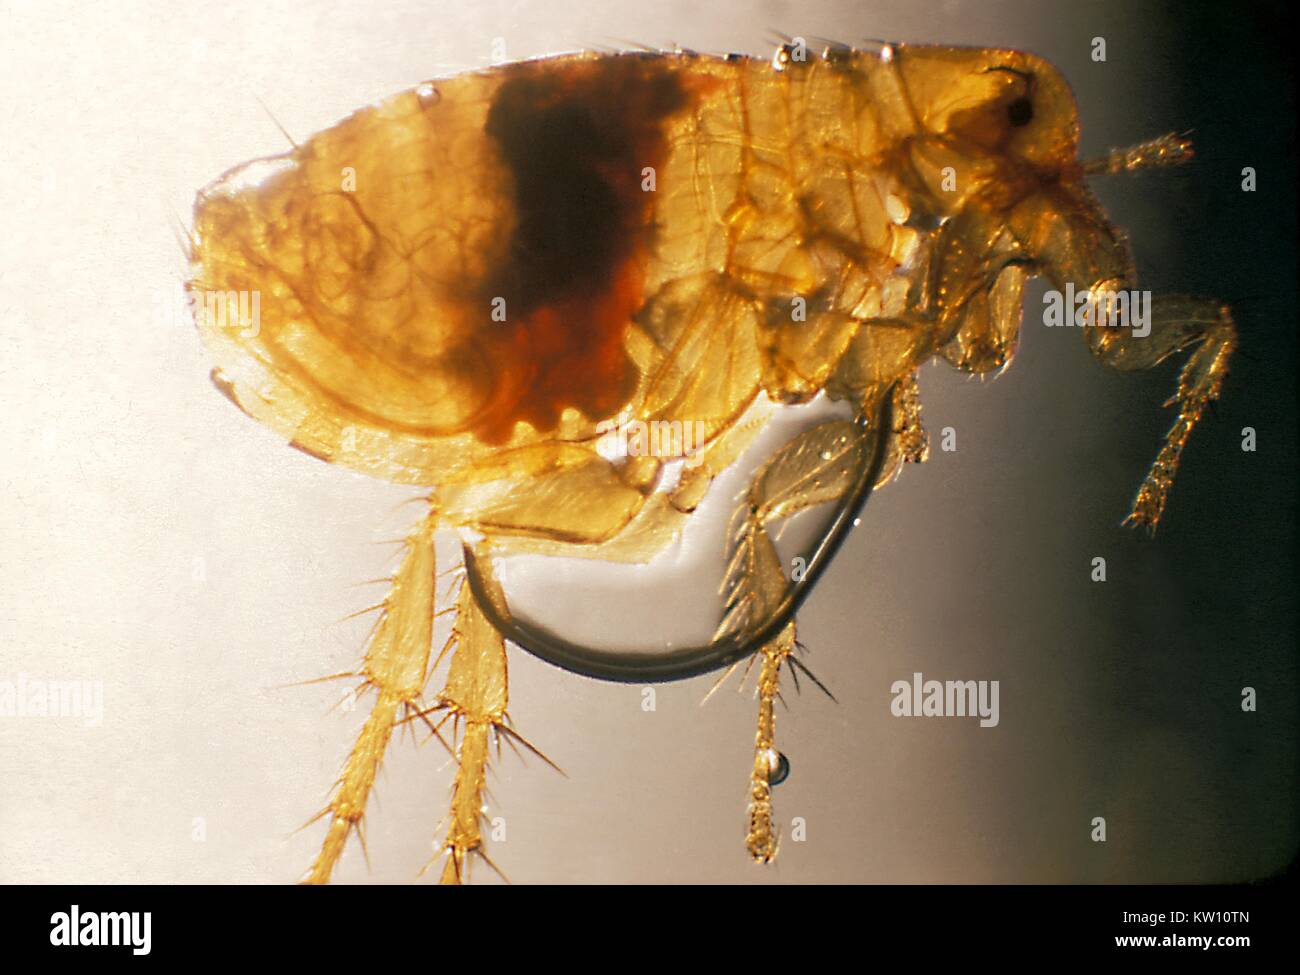 Plague infected male Xenopsylla cheopis 28 days after feeding on an inoculated mouse. During feeding, the flea draws viable Y. pestis organisms into its esophagus, which multiply and block the proventriculus just in front of the stomach, later forcing the flea to regurgitate infected blood unto the host when it tries to swallow. Image courtesy CDC/Dr. Pratt, 1948. Stock Photo